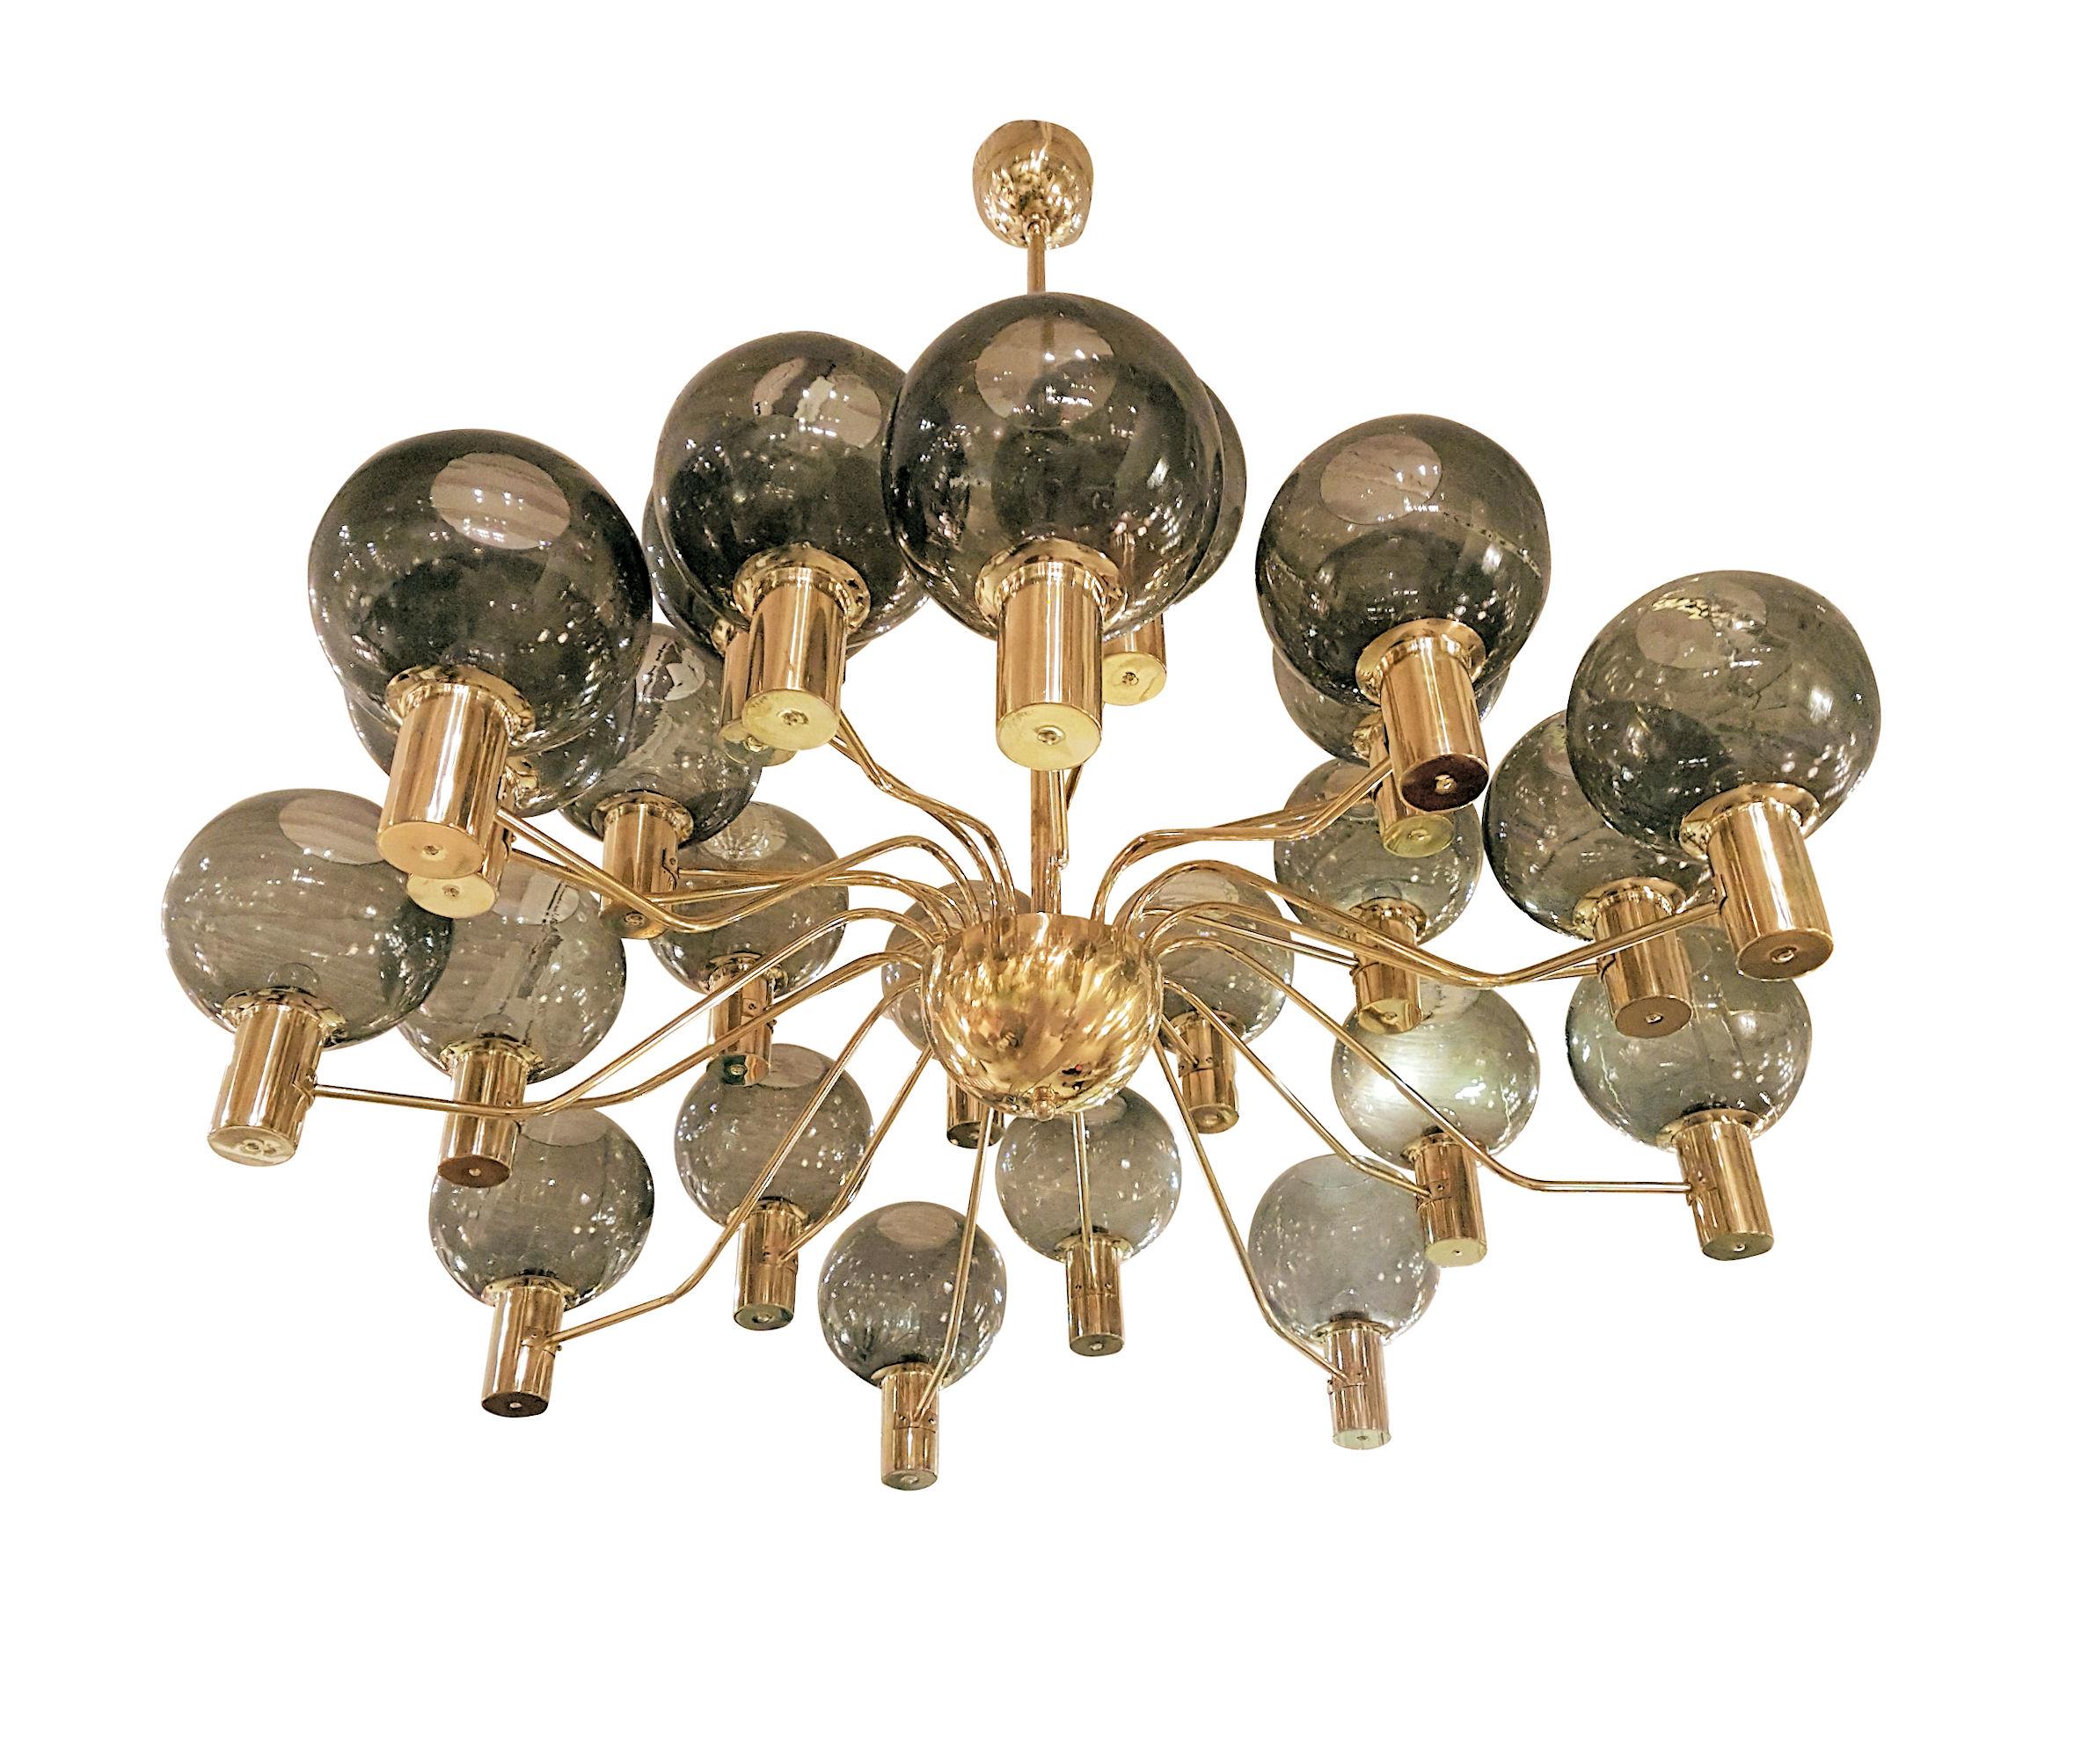 Extra large Mid-Century Modern 24-light polished brass chandelier, attributed to Hans Agne Jakobsson, Sweden, 1970s.
This large chandelier has 24 beige and transparent glass globes, covering the light bulb. 
It has been rewired with UL materials,